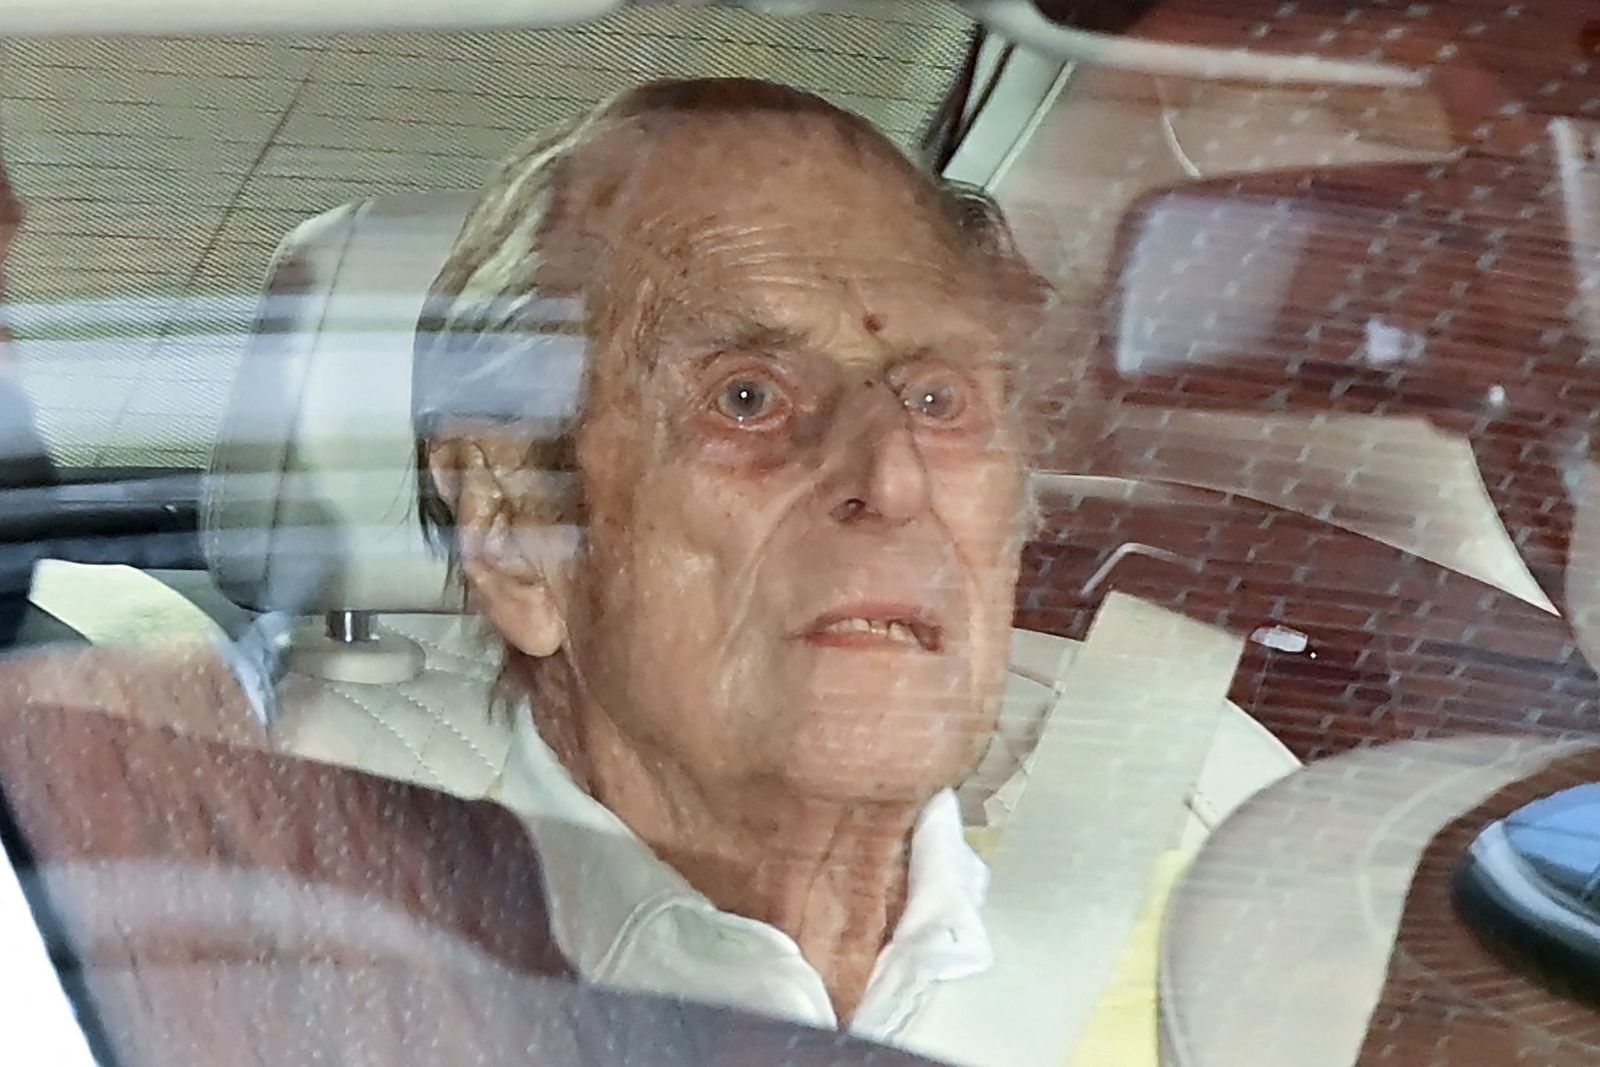 Prince Philip traveling from King Edward VII's Hospital in central London on March 16, 2021. | Getty Images